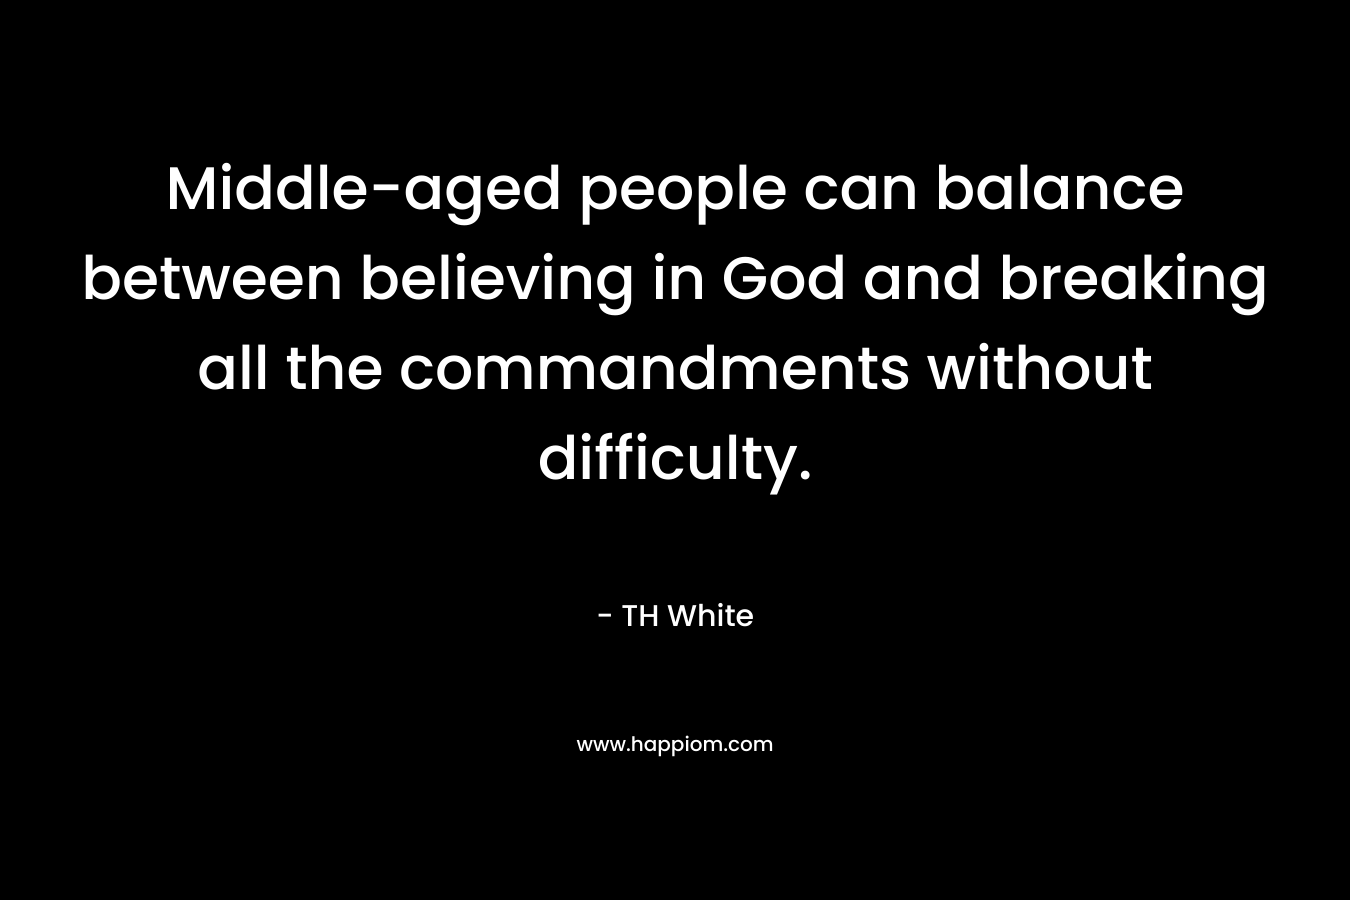 Middle-aged people can balance between believing in God and breaking all the commandments without difficulty. – TH White